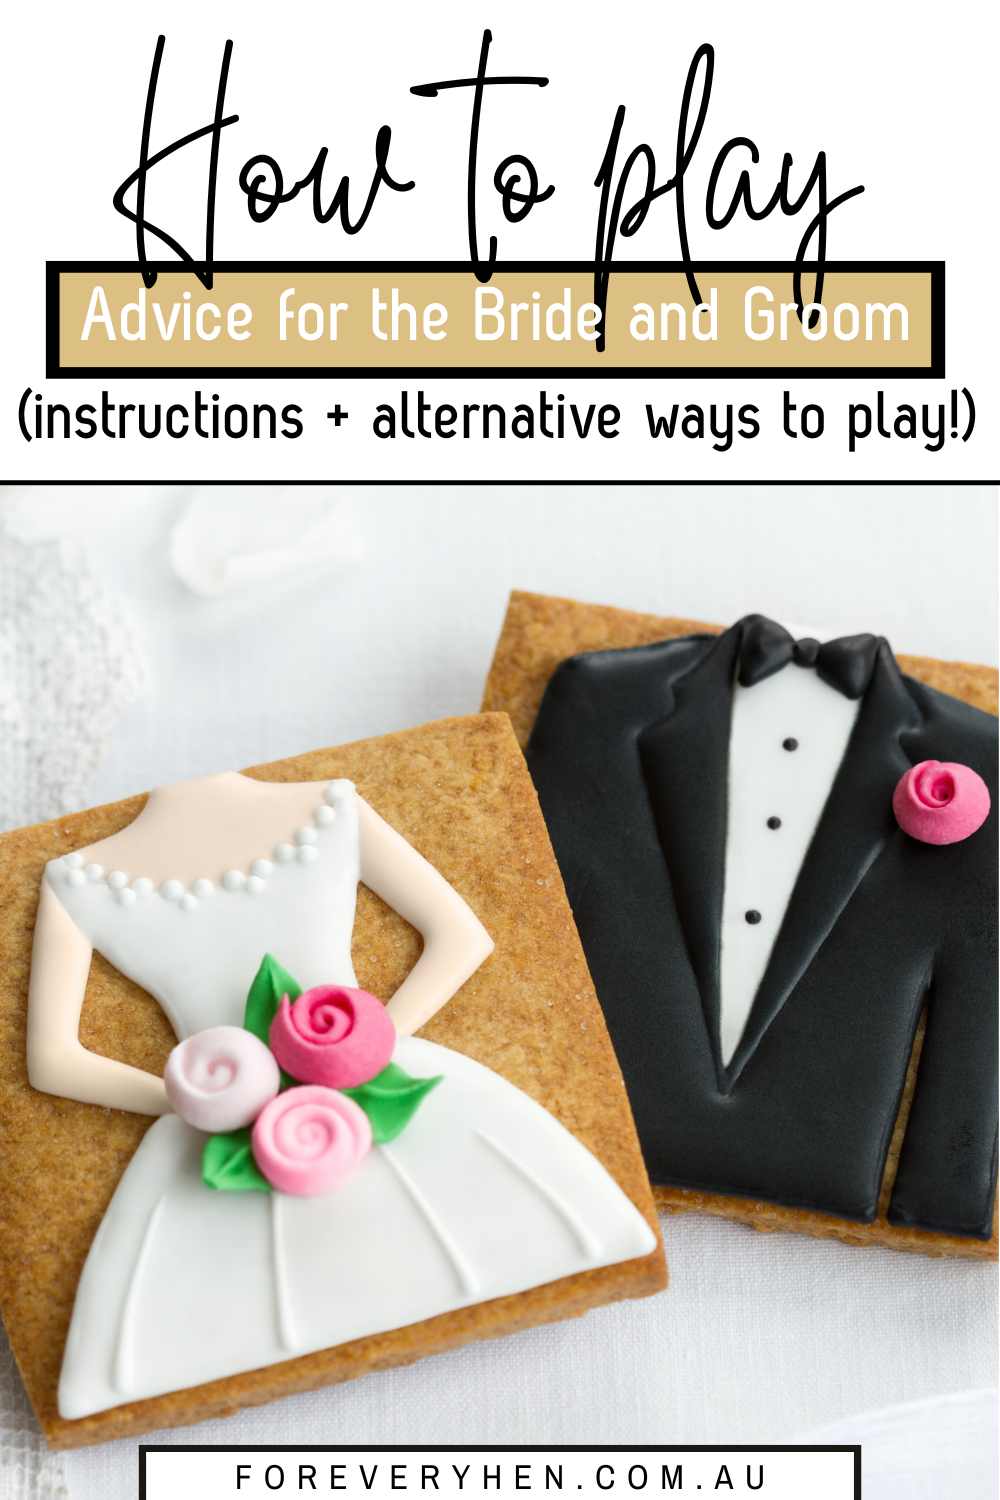 Image of a bride and groom biscuit. Text overlay: How to play advice for the bride and groom (instructions + alternative ways to play)